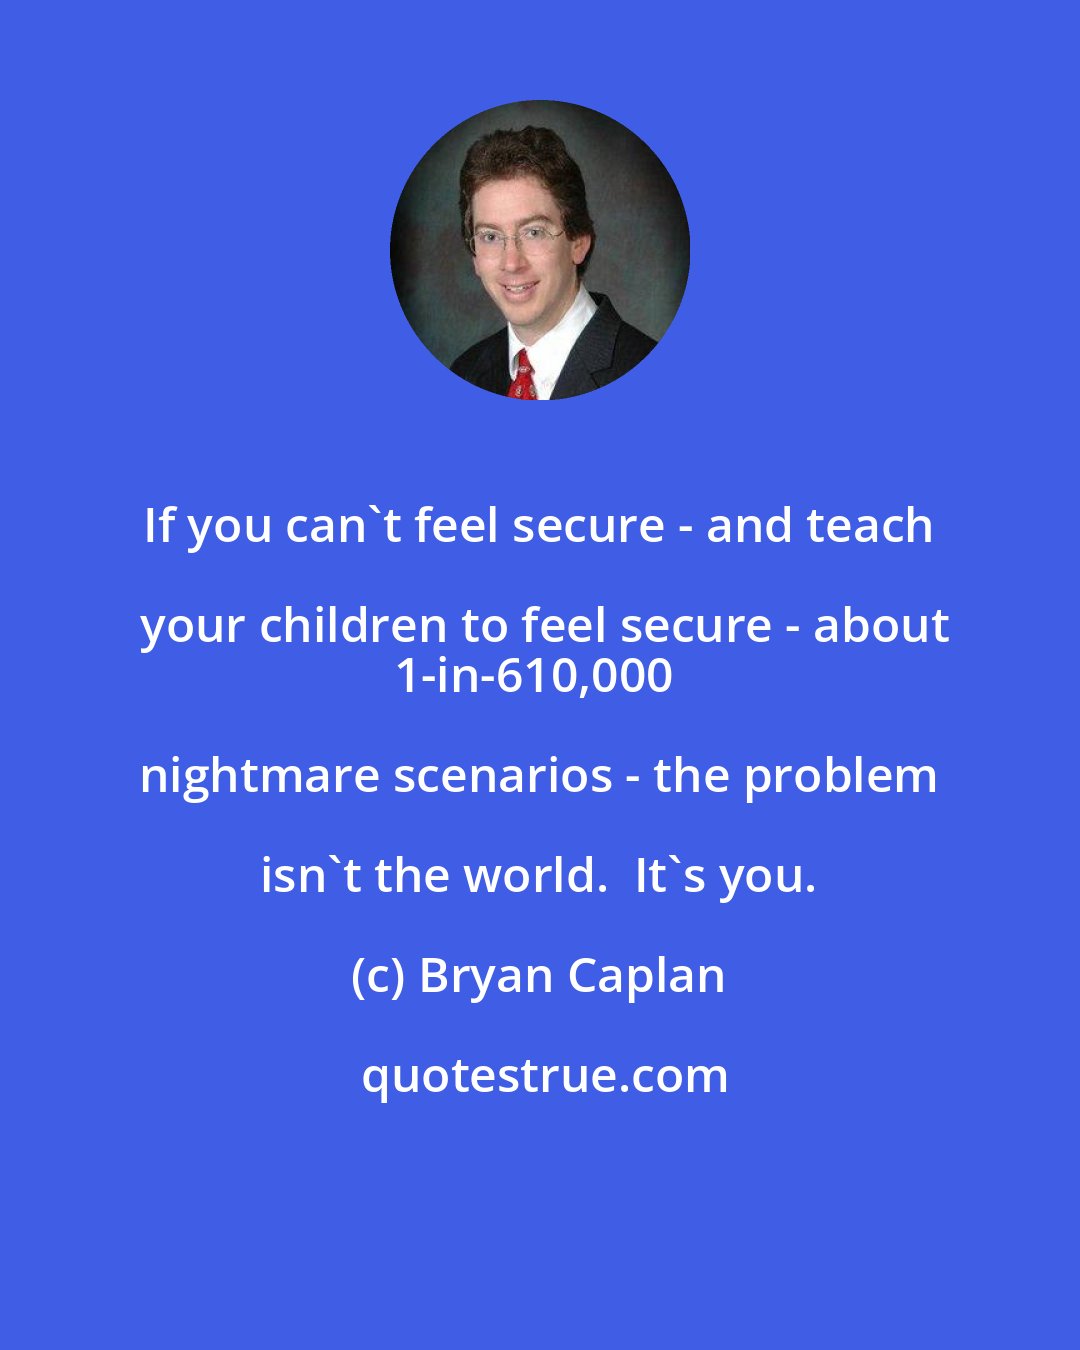 Bryan Caplan: If you can't feel secure - and teach your children to feel secure - about
1-in-610,000 nightmare scenarios - the problem isn't the world.  It's you.